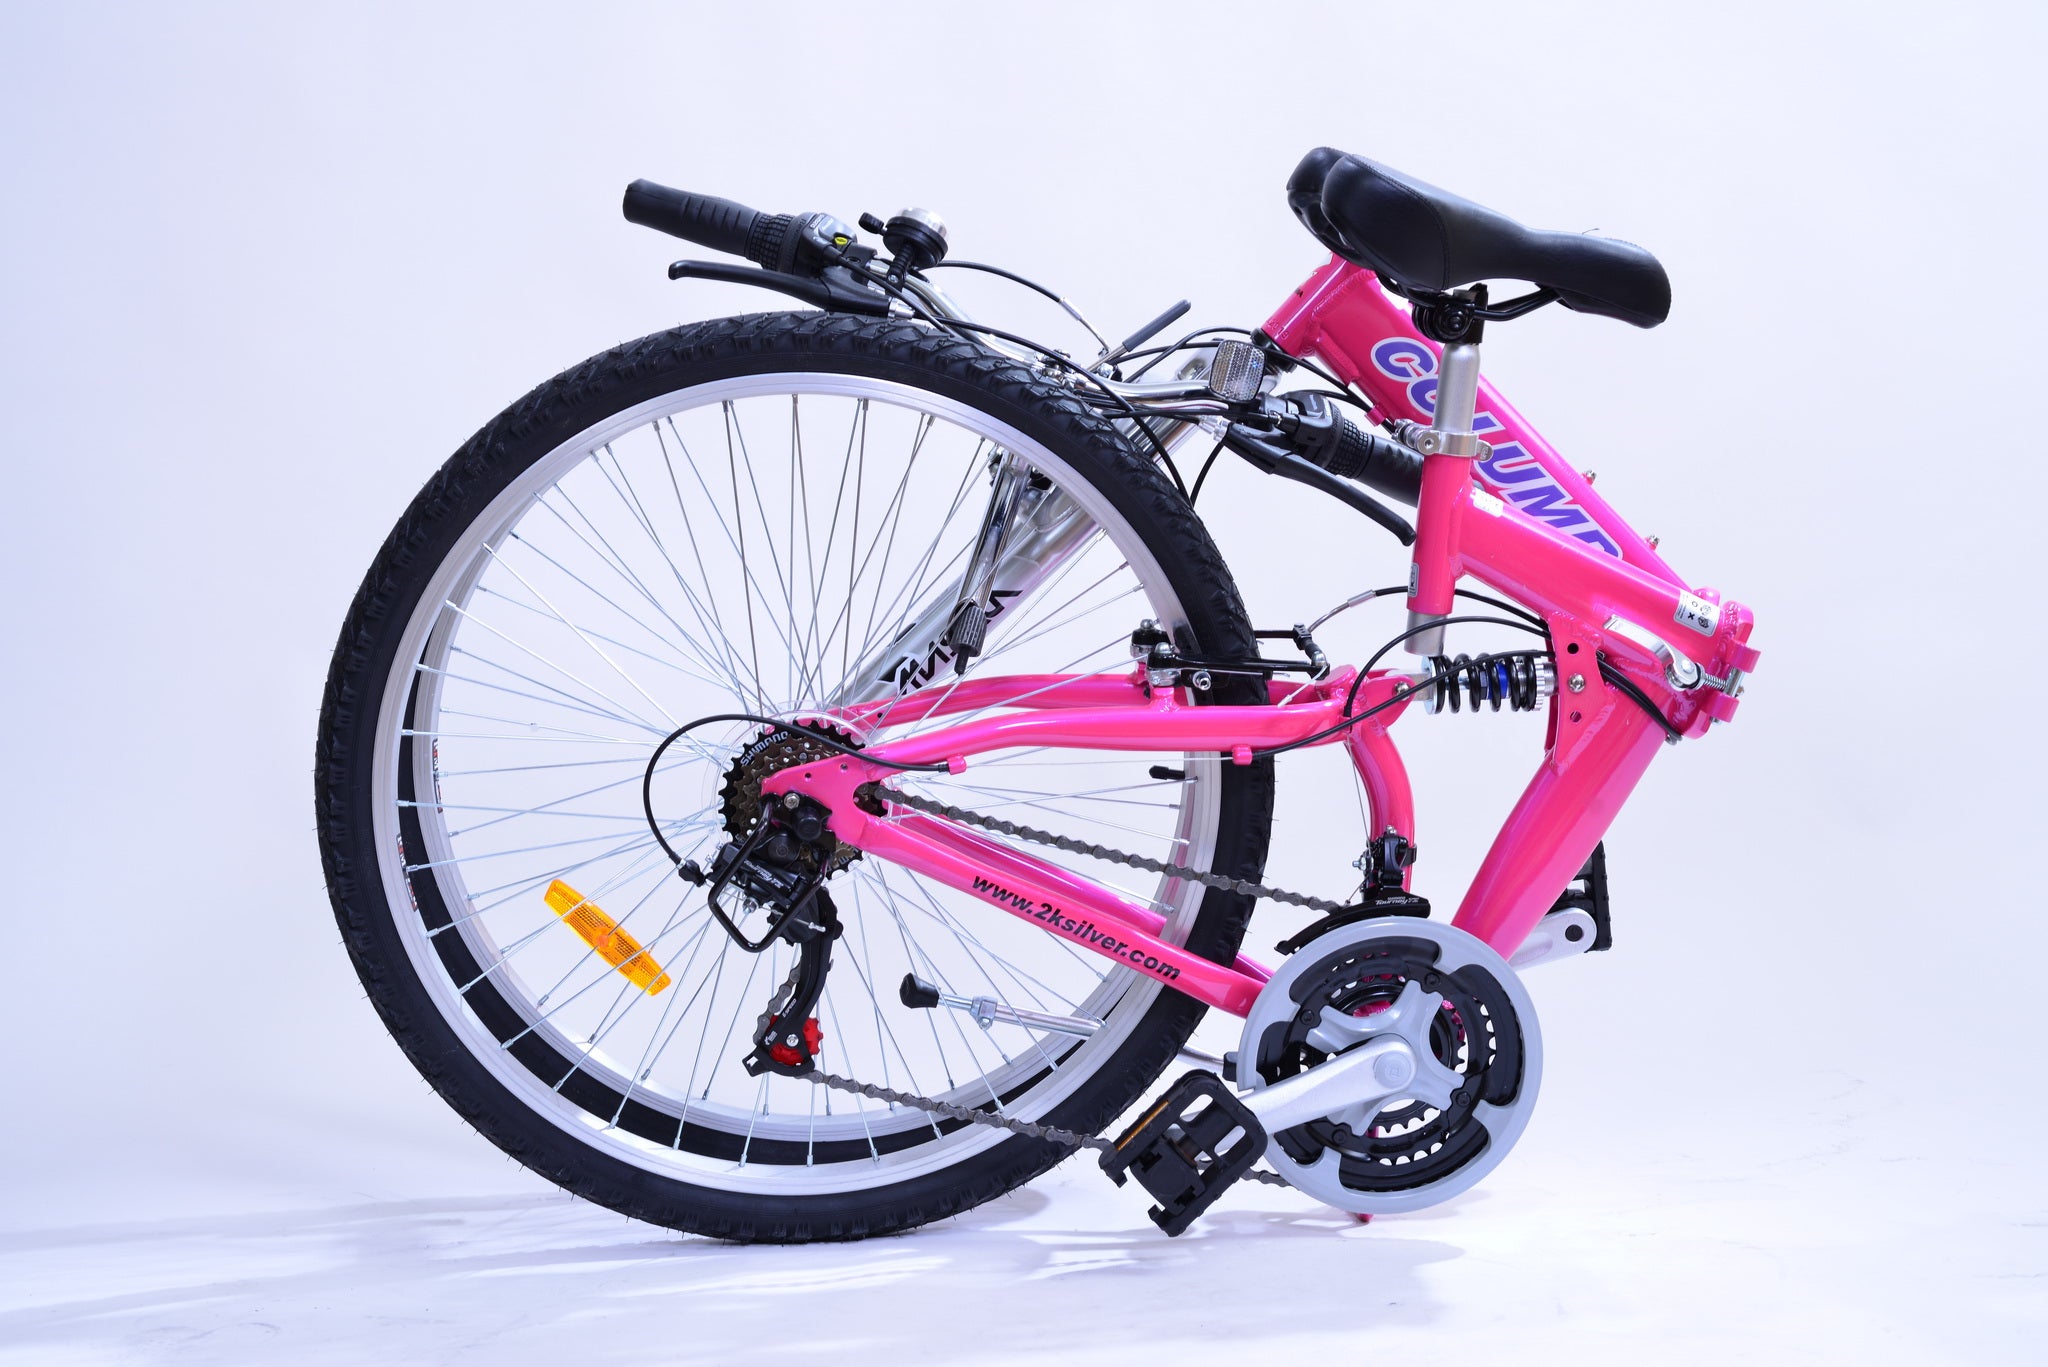 Bright and vibrant pink folding bike in a folded position sitting on the ground.